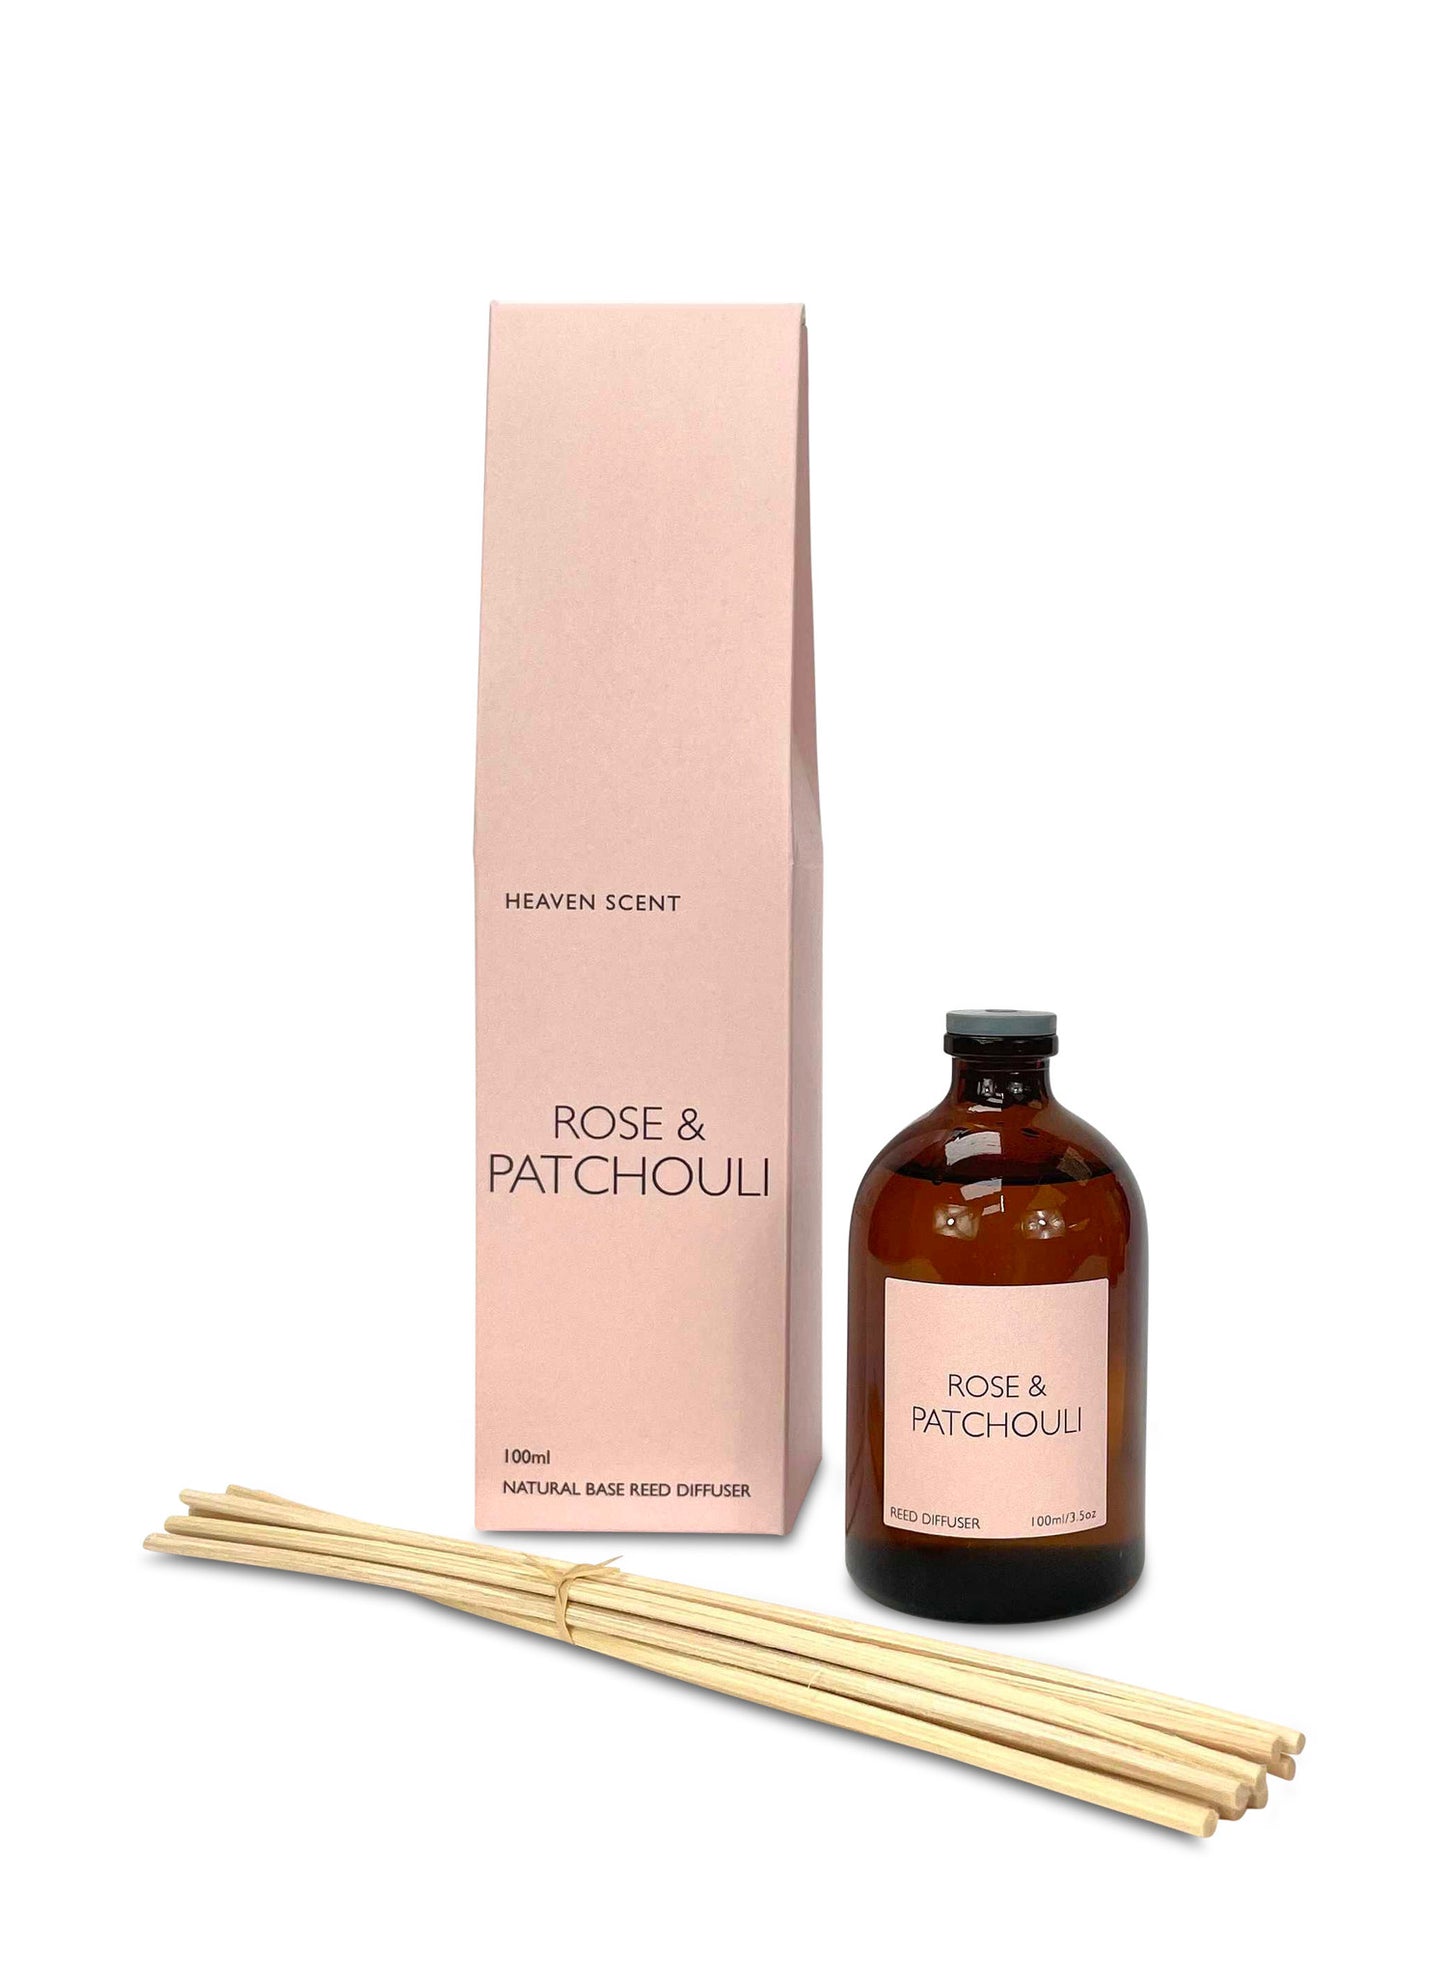 100ml Rose & Patchouli Reed Diffuser has an earthy, woody, musky scent that's tremendously rich and deep juxtaposed with delightful sweet-herbaceous and spicy notes.